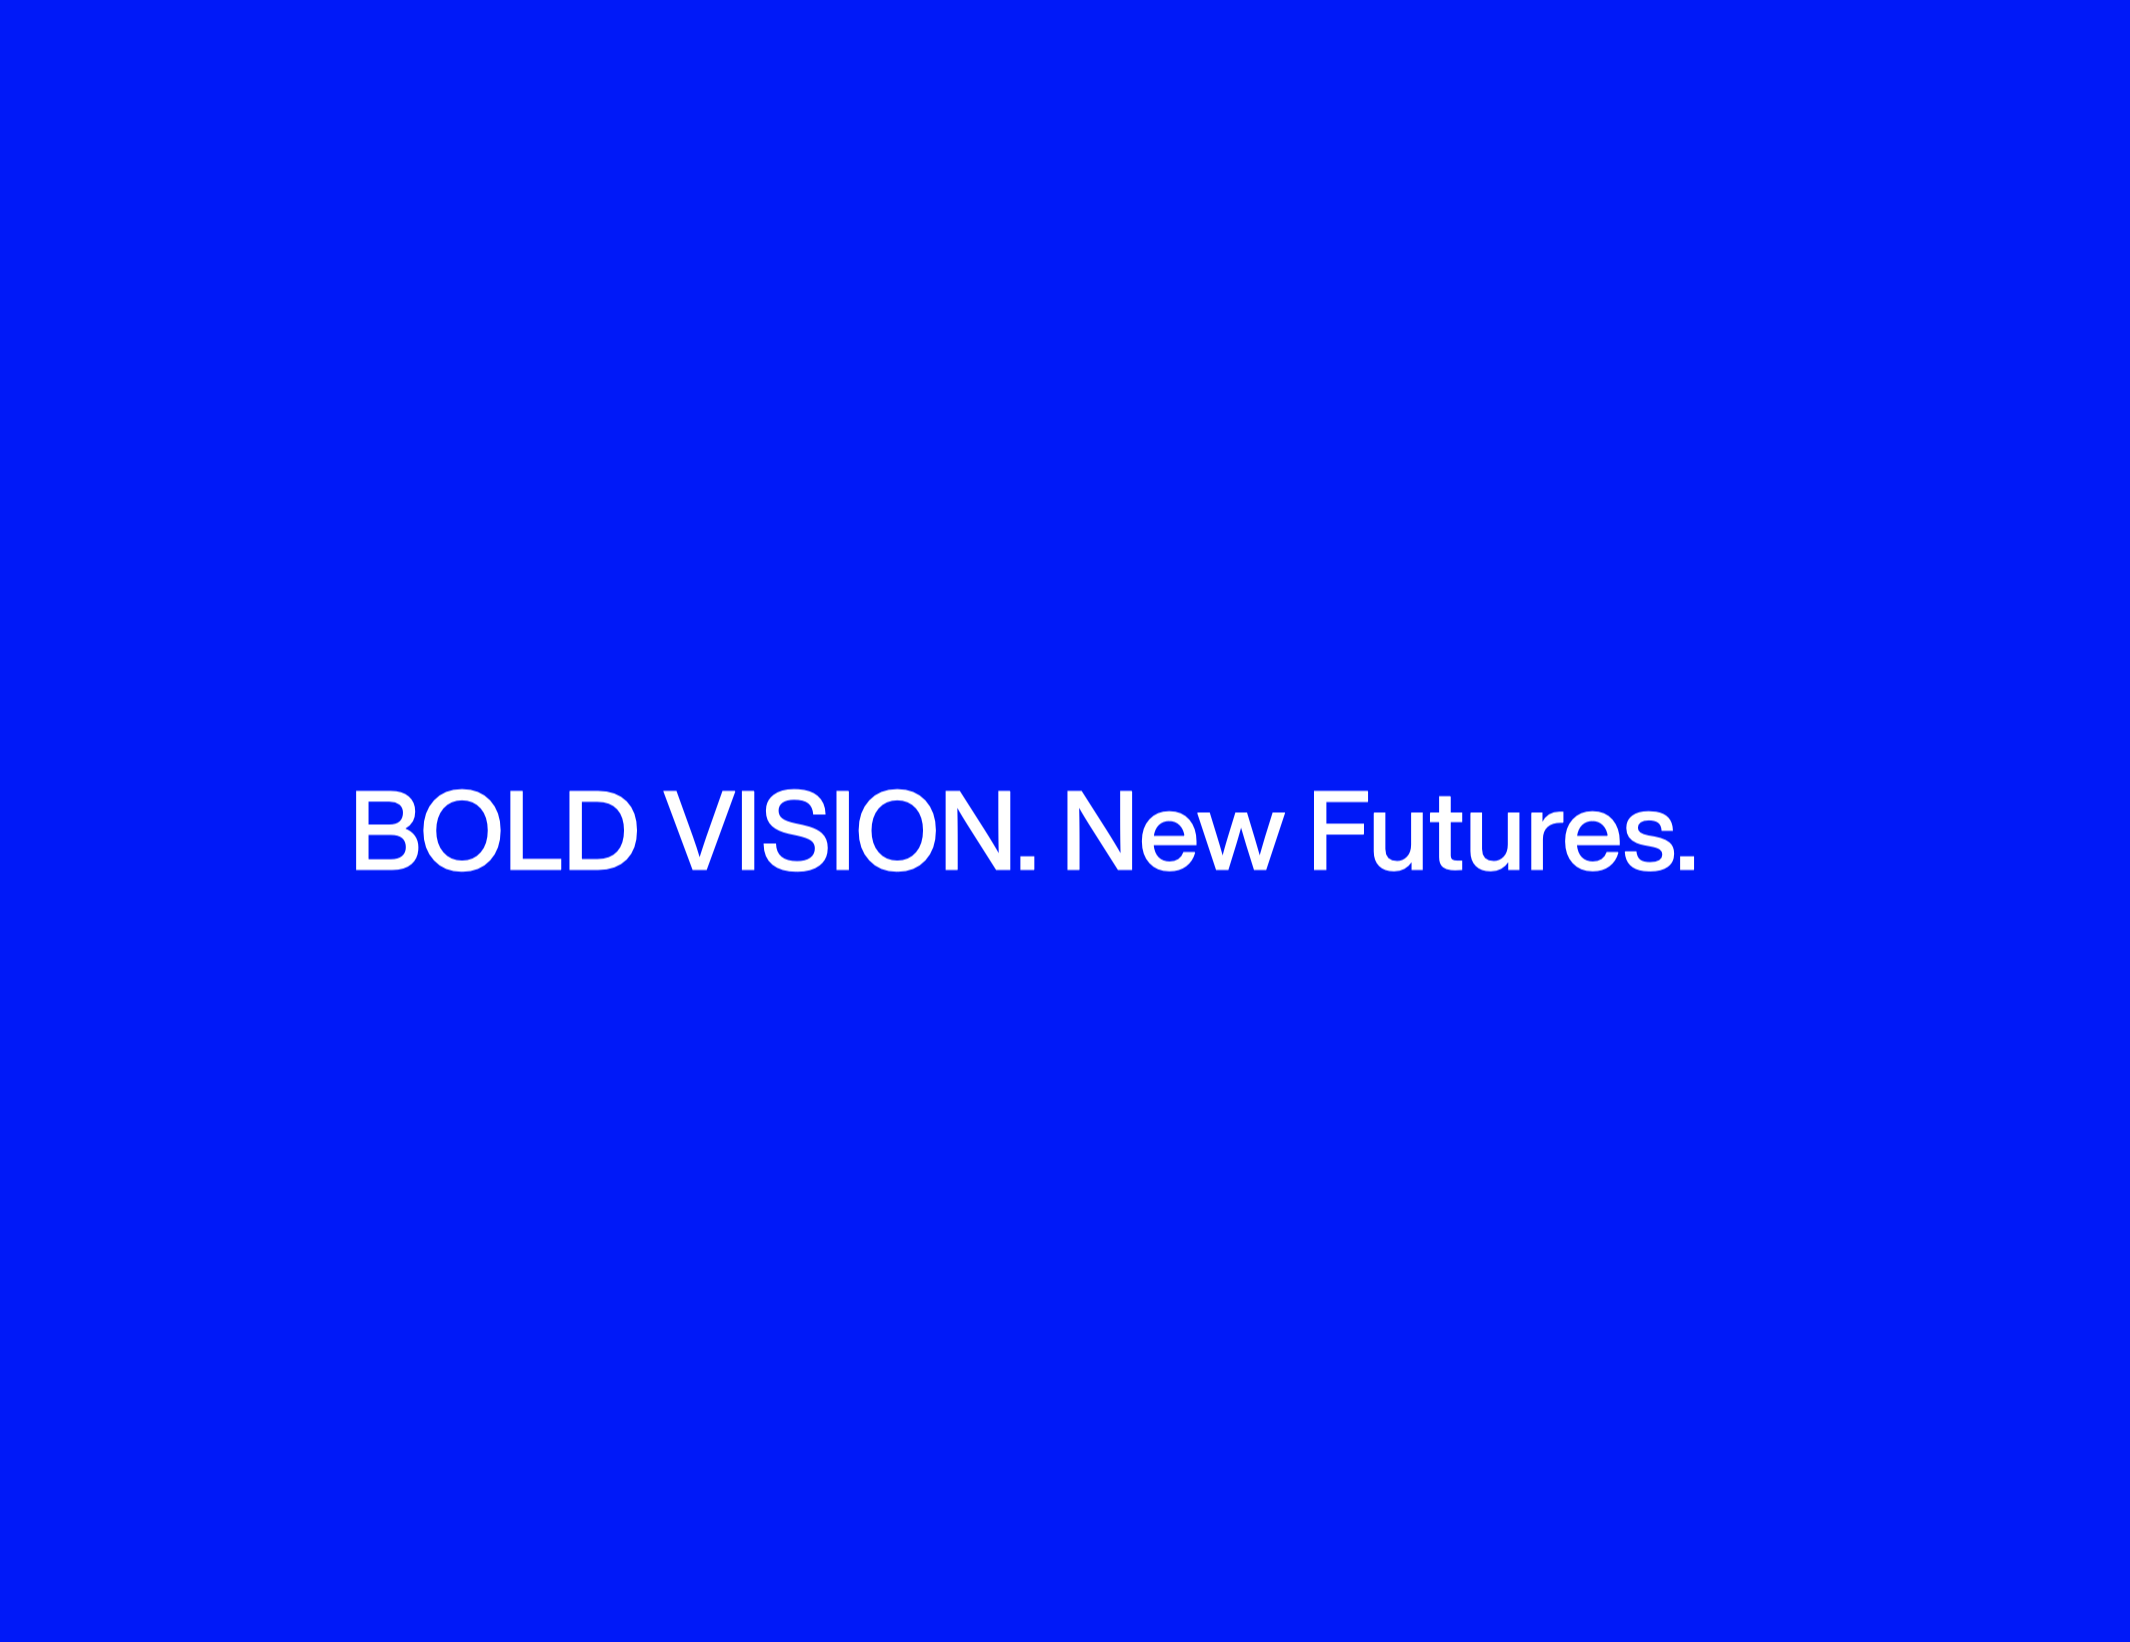 BOLD VISION. New Futures.